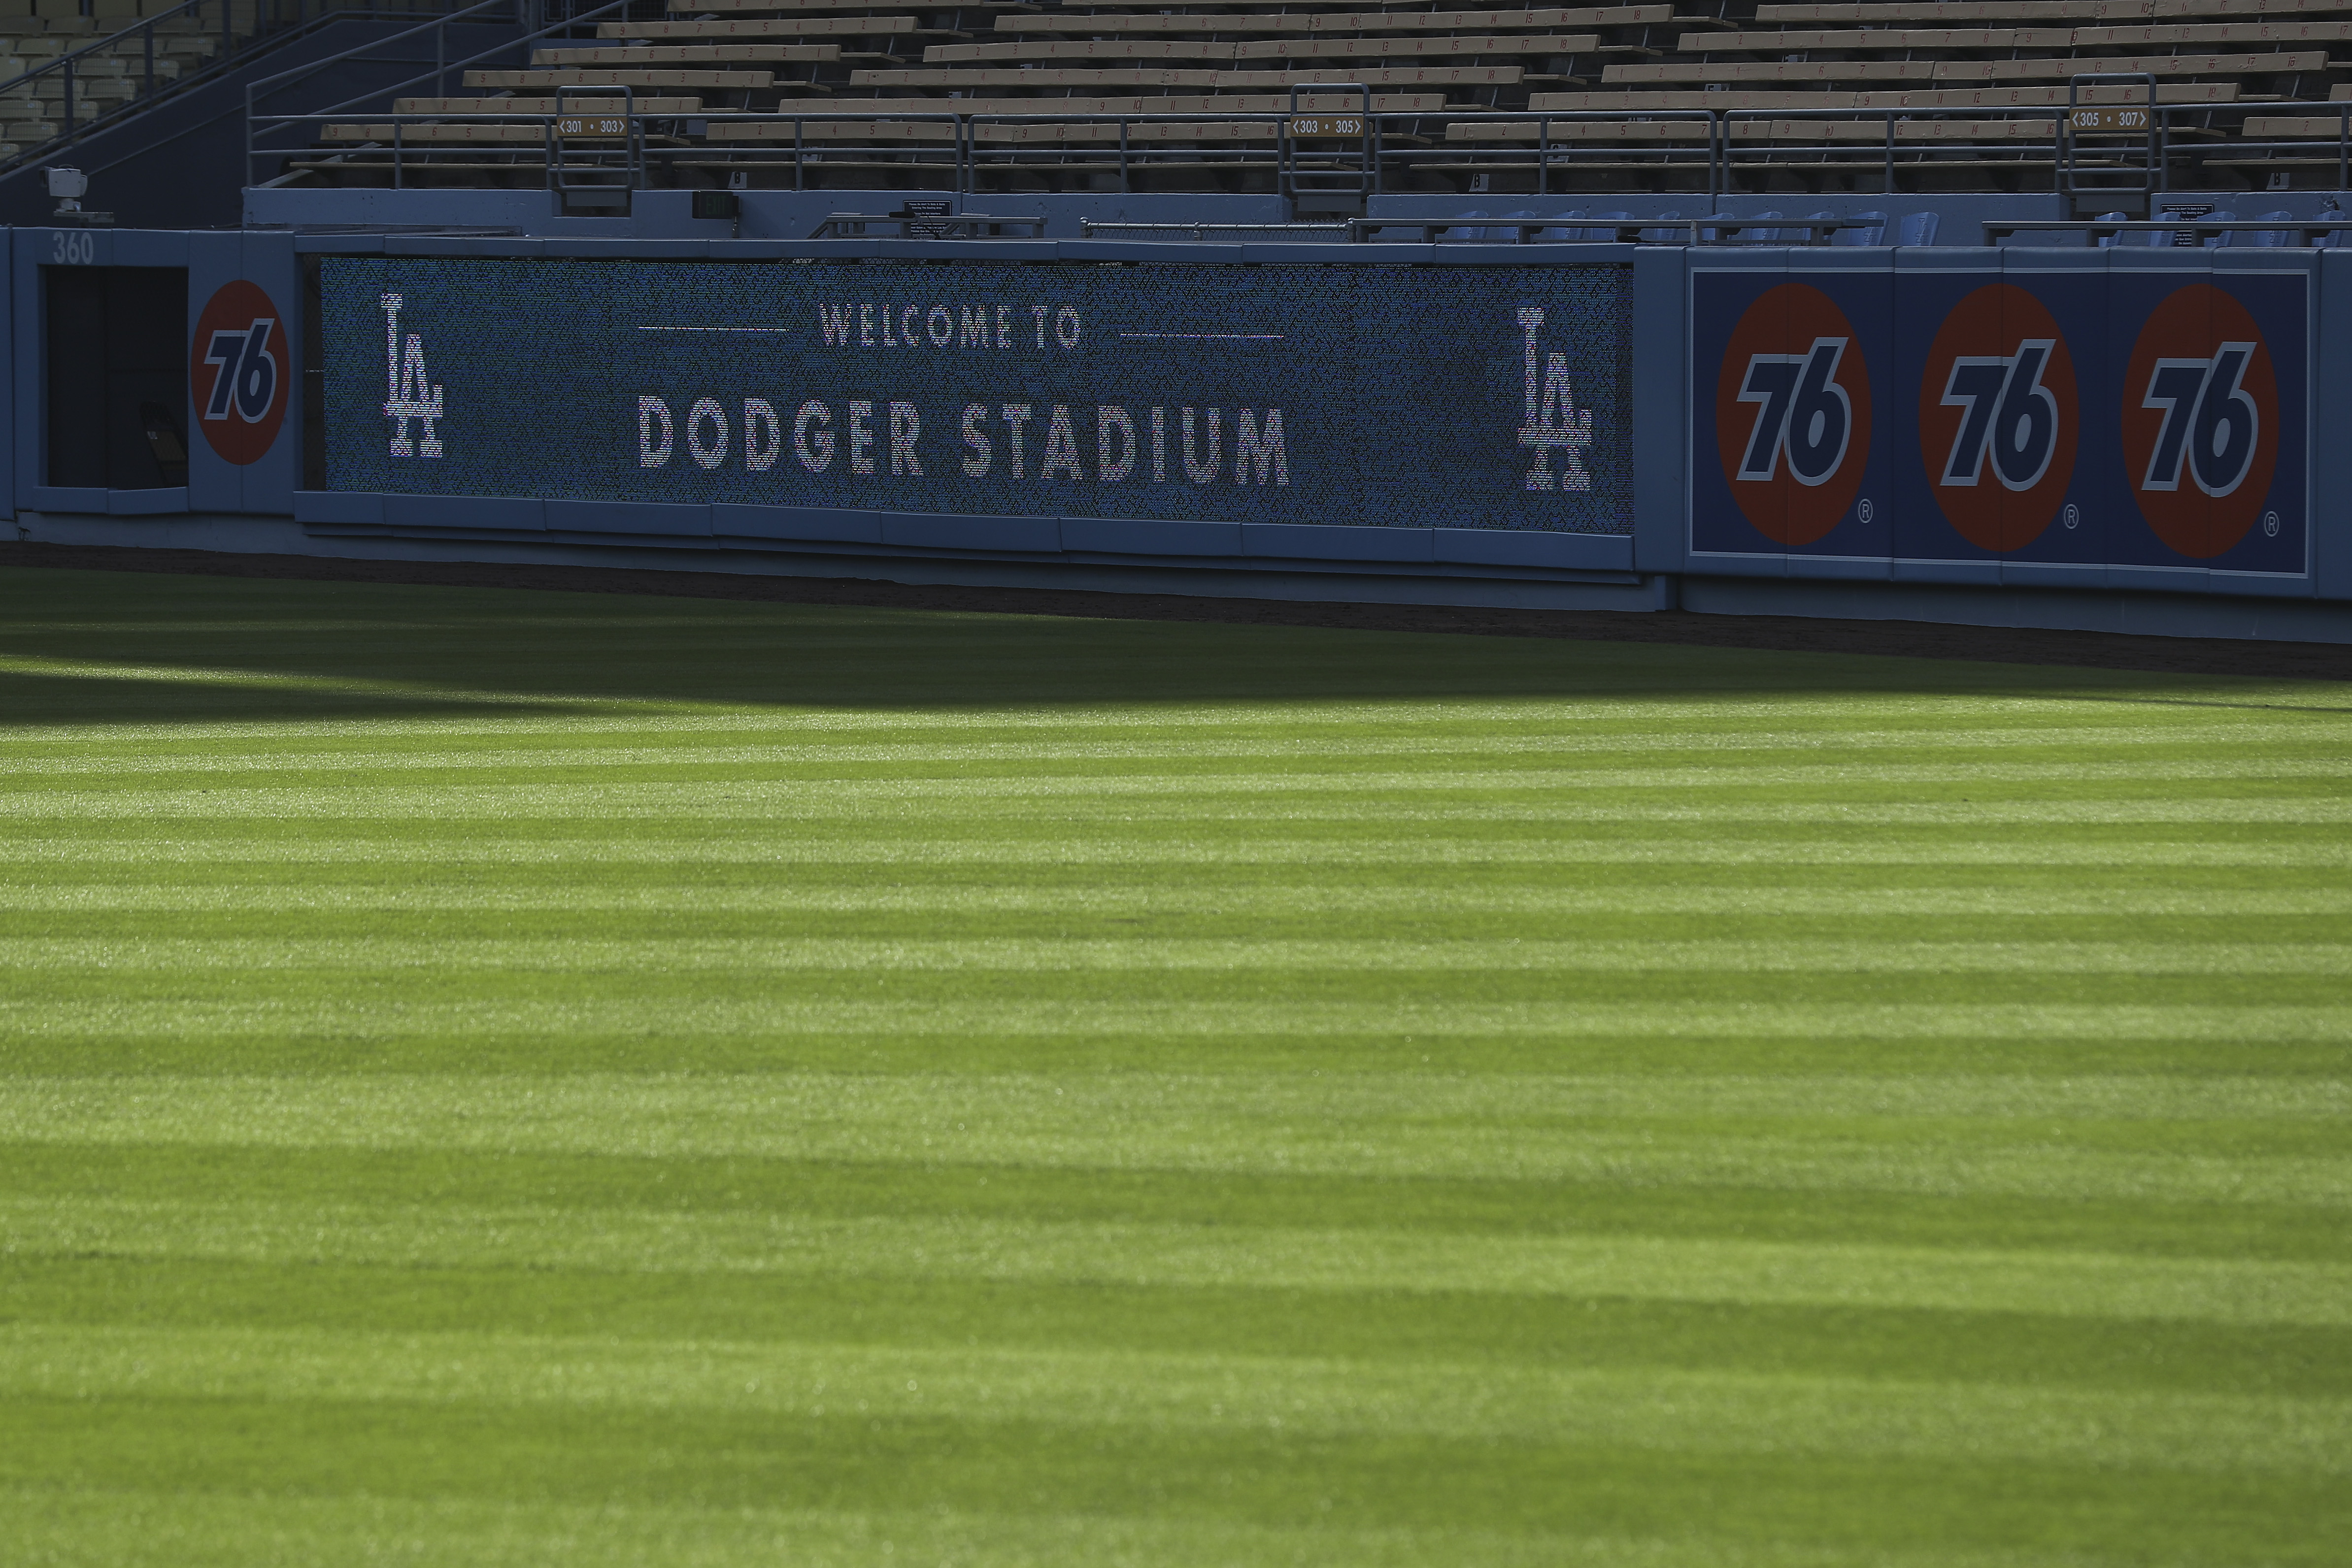 Fans returning to Dodger Stadium can expect prepaid parking